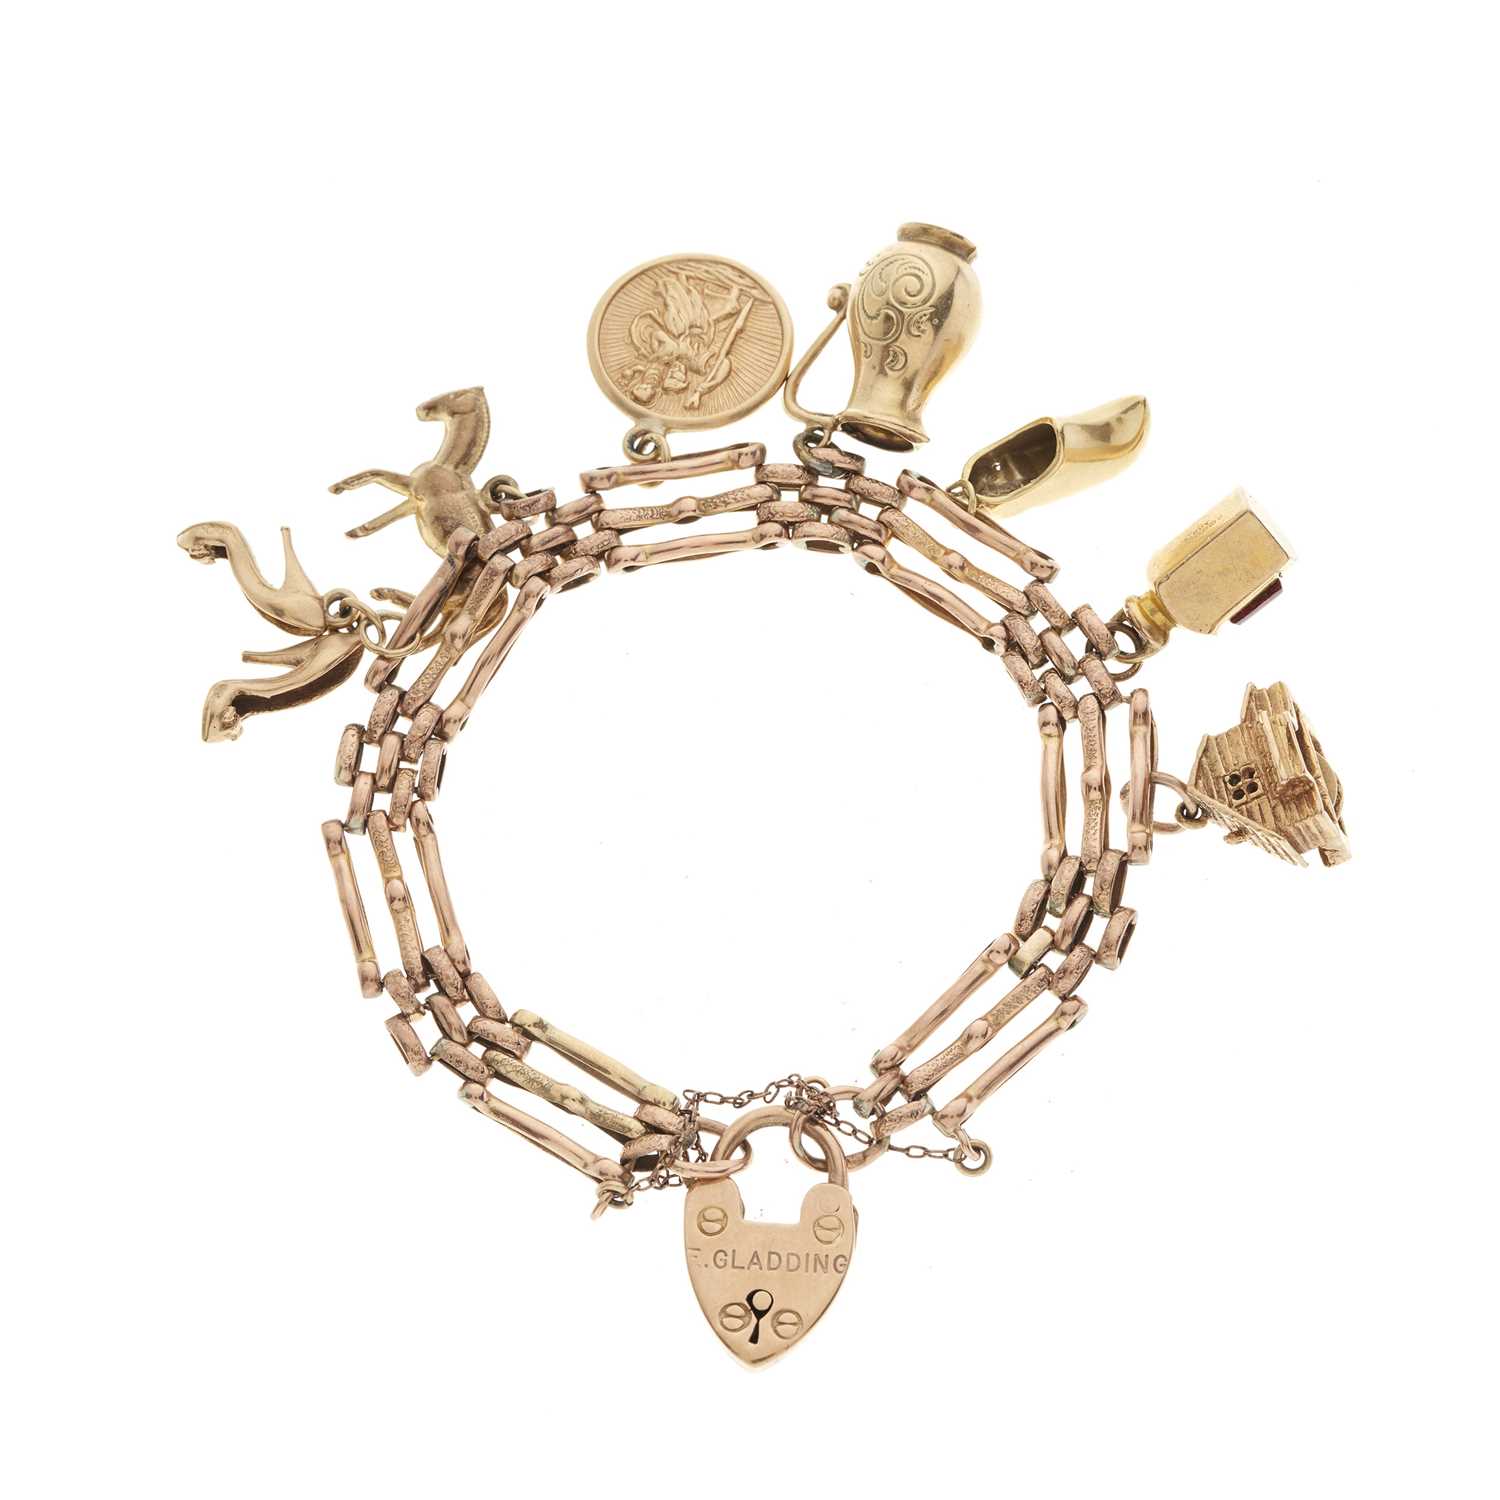 Lot 95 - A mid 20th century 9ct gold gate bracelet, suspending various charms